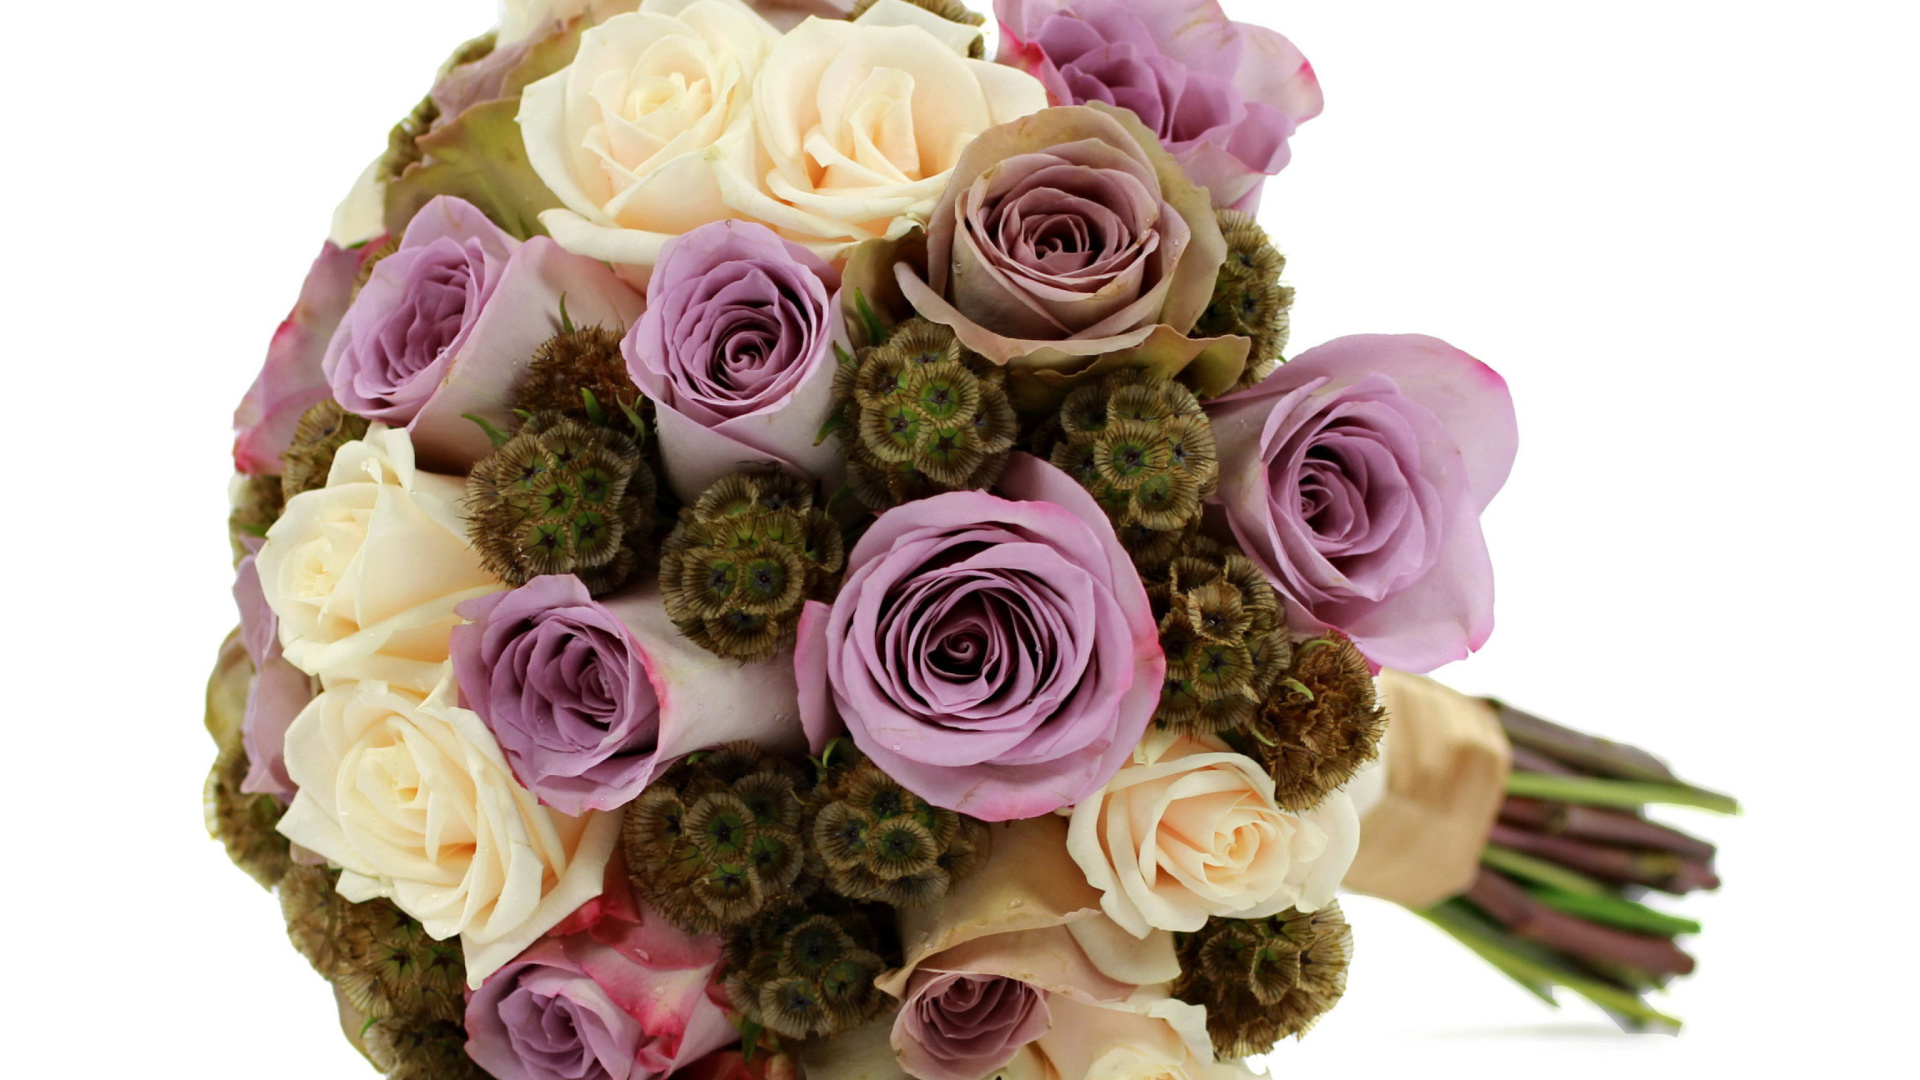 Das Bouquet with lilac roses Wallpaper 1920x1080